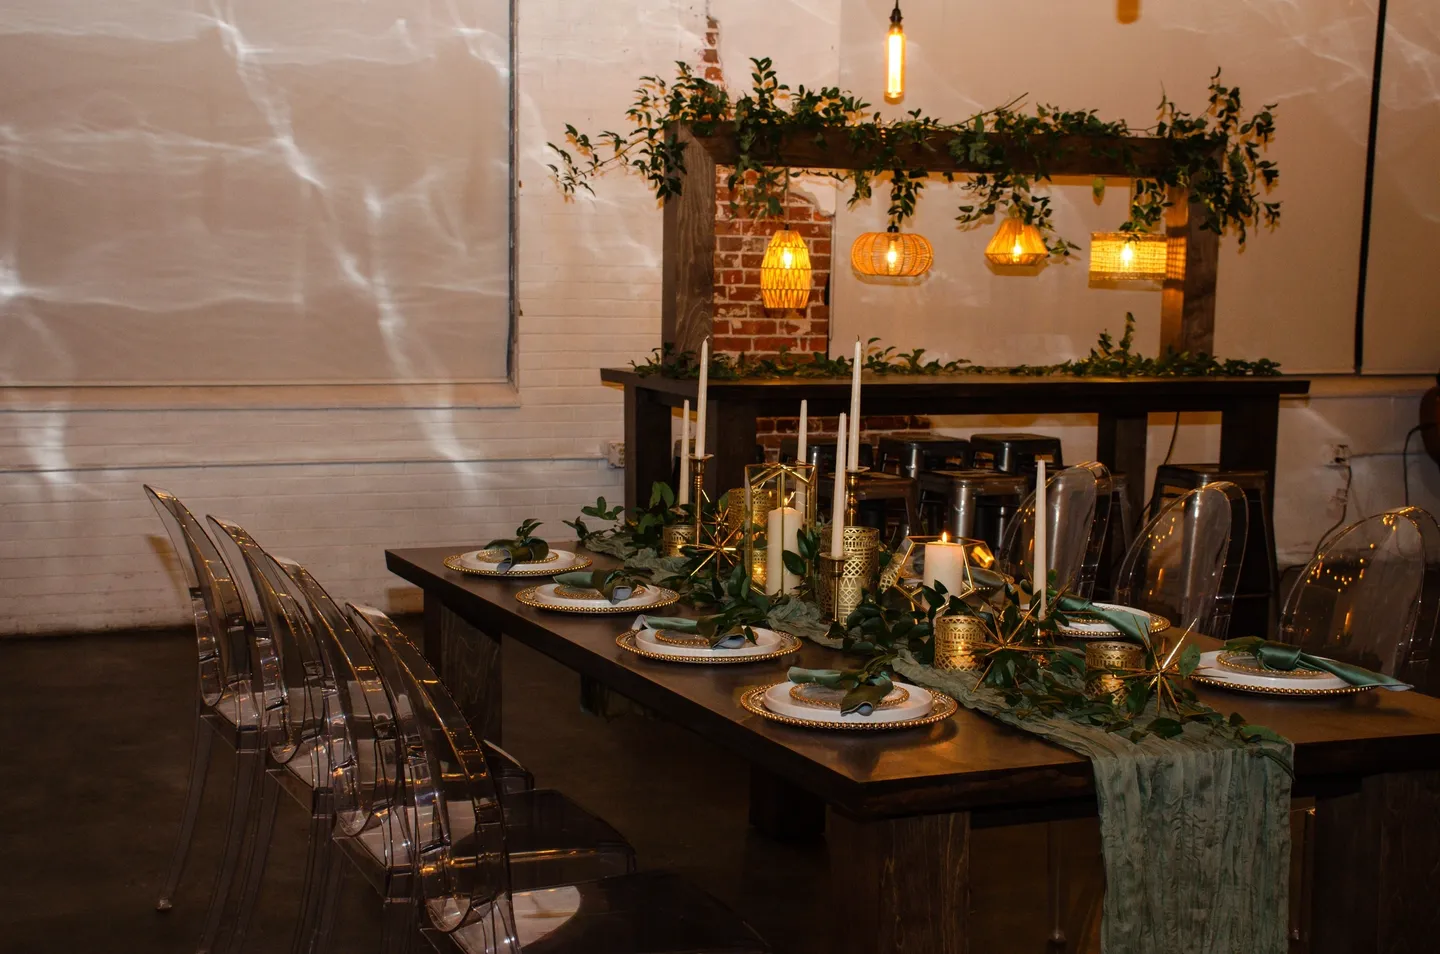 Elegant event dining setup with clear chairs, greenery, and warm lighting.